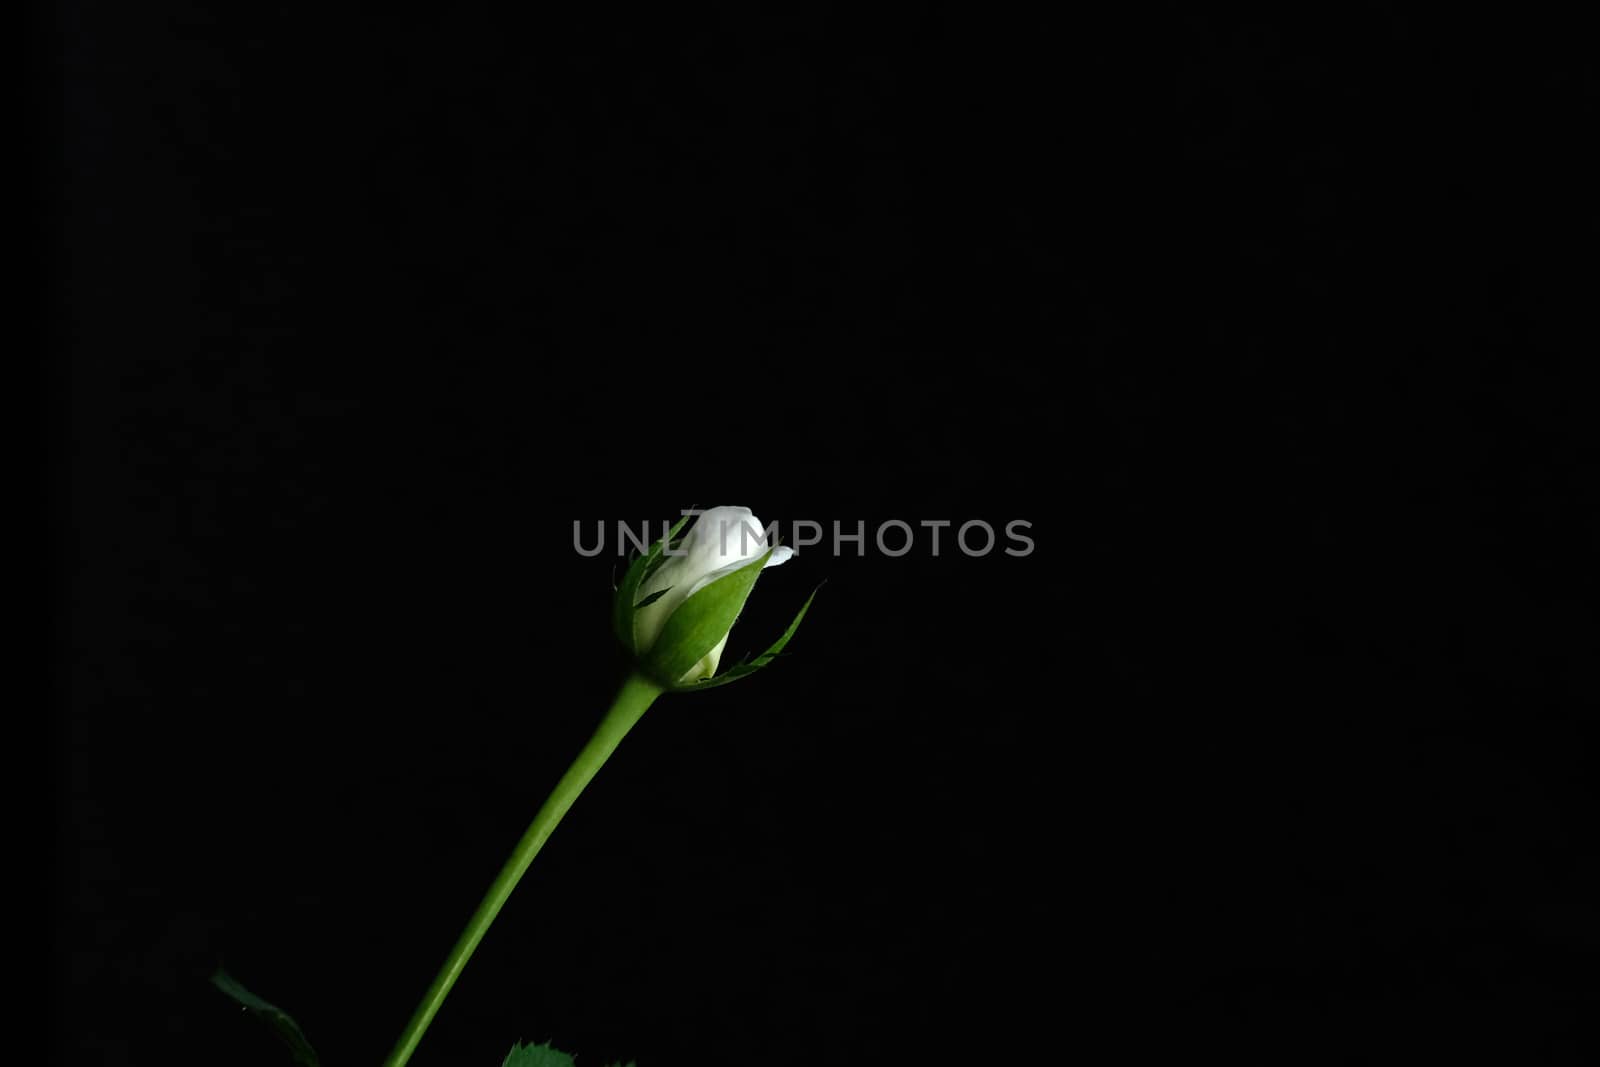 white rose bud flower with stem and leaf. Image photo